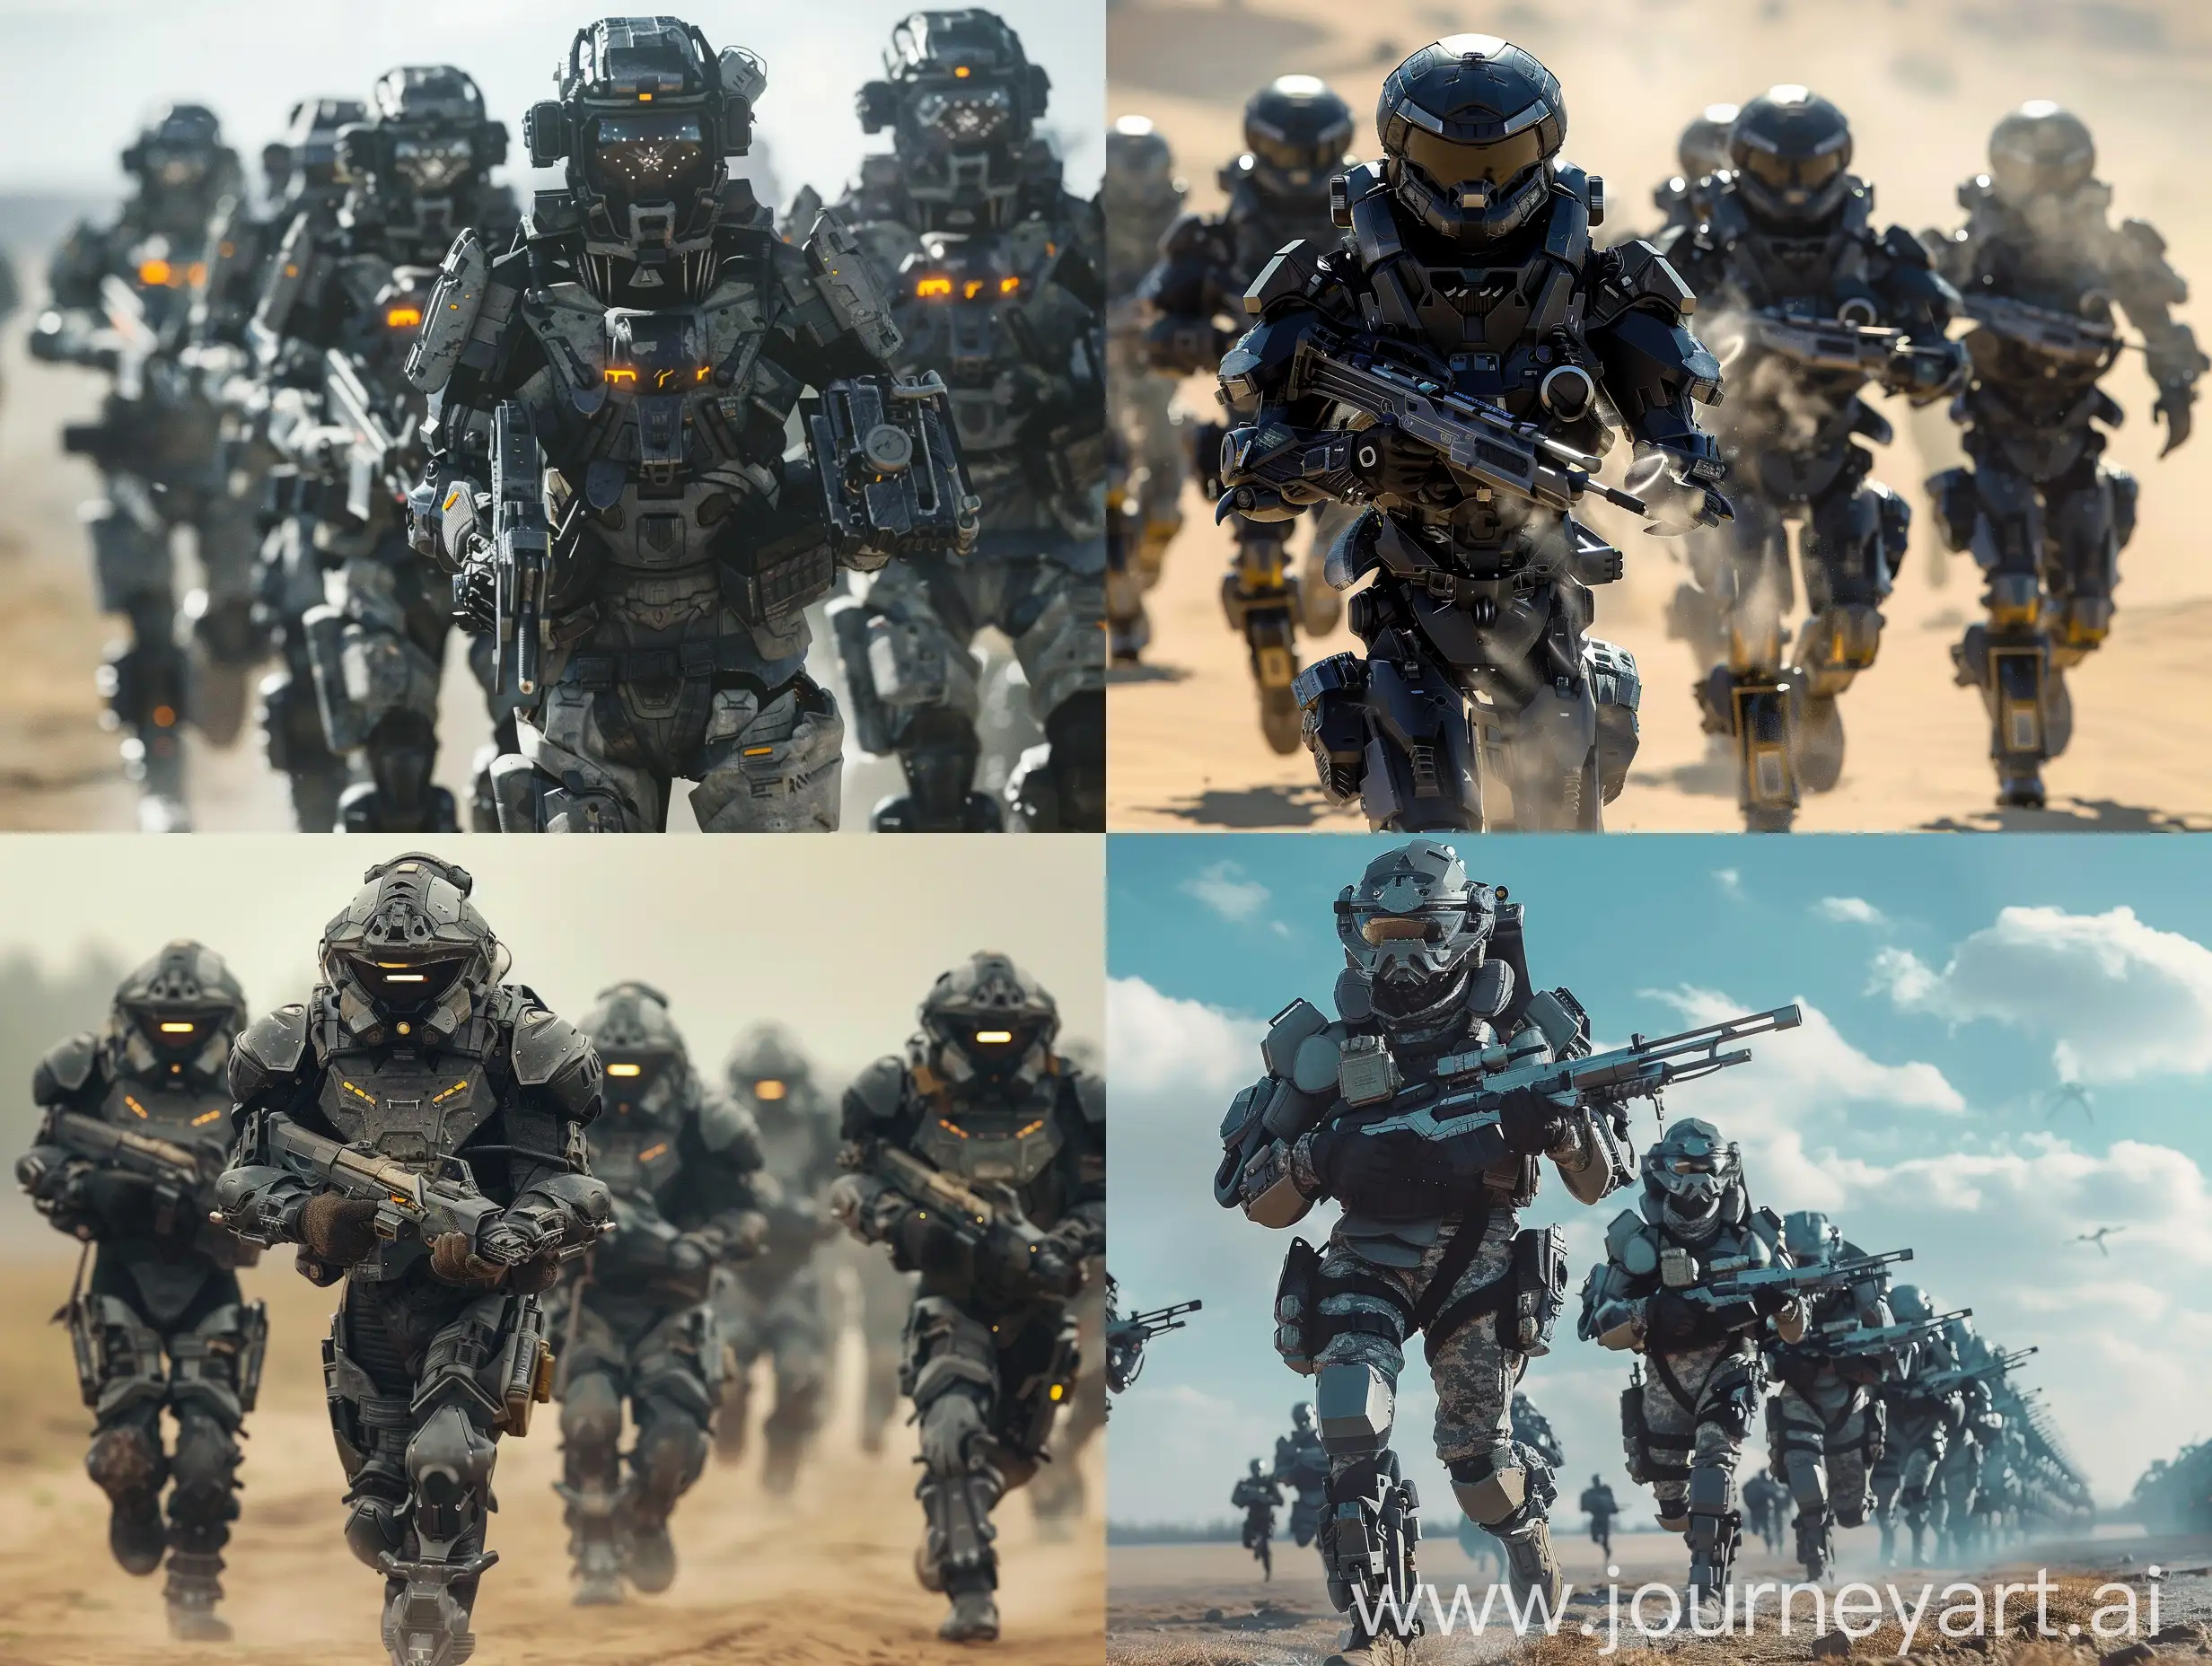 Futuristic-Soldiers-Advancing-in-HighTech-Combat-Gear